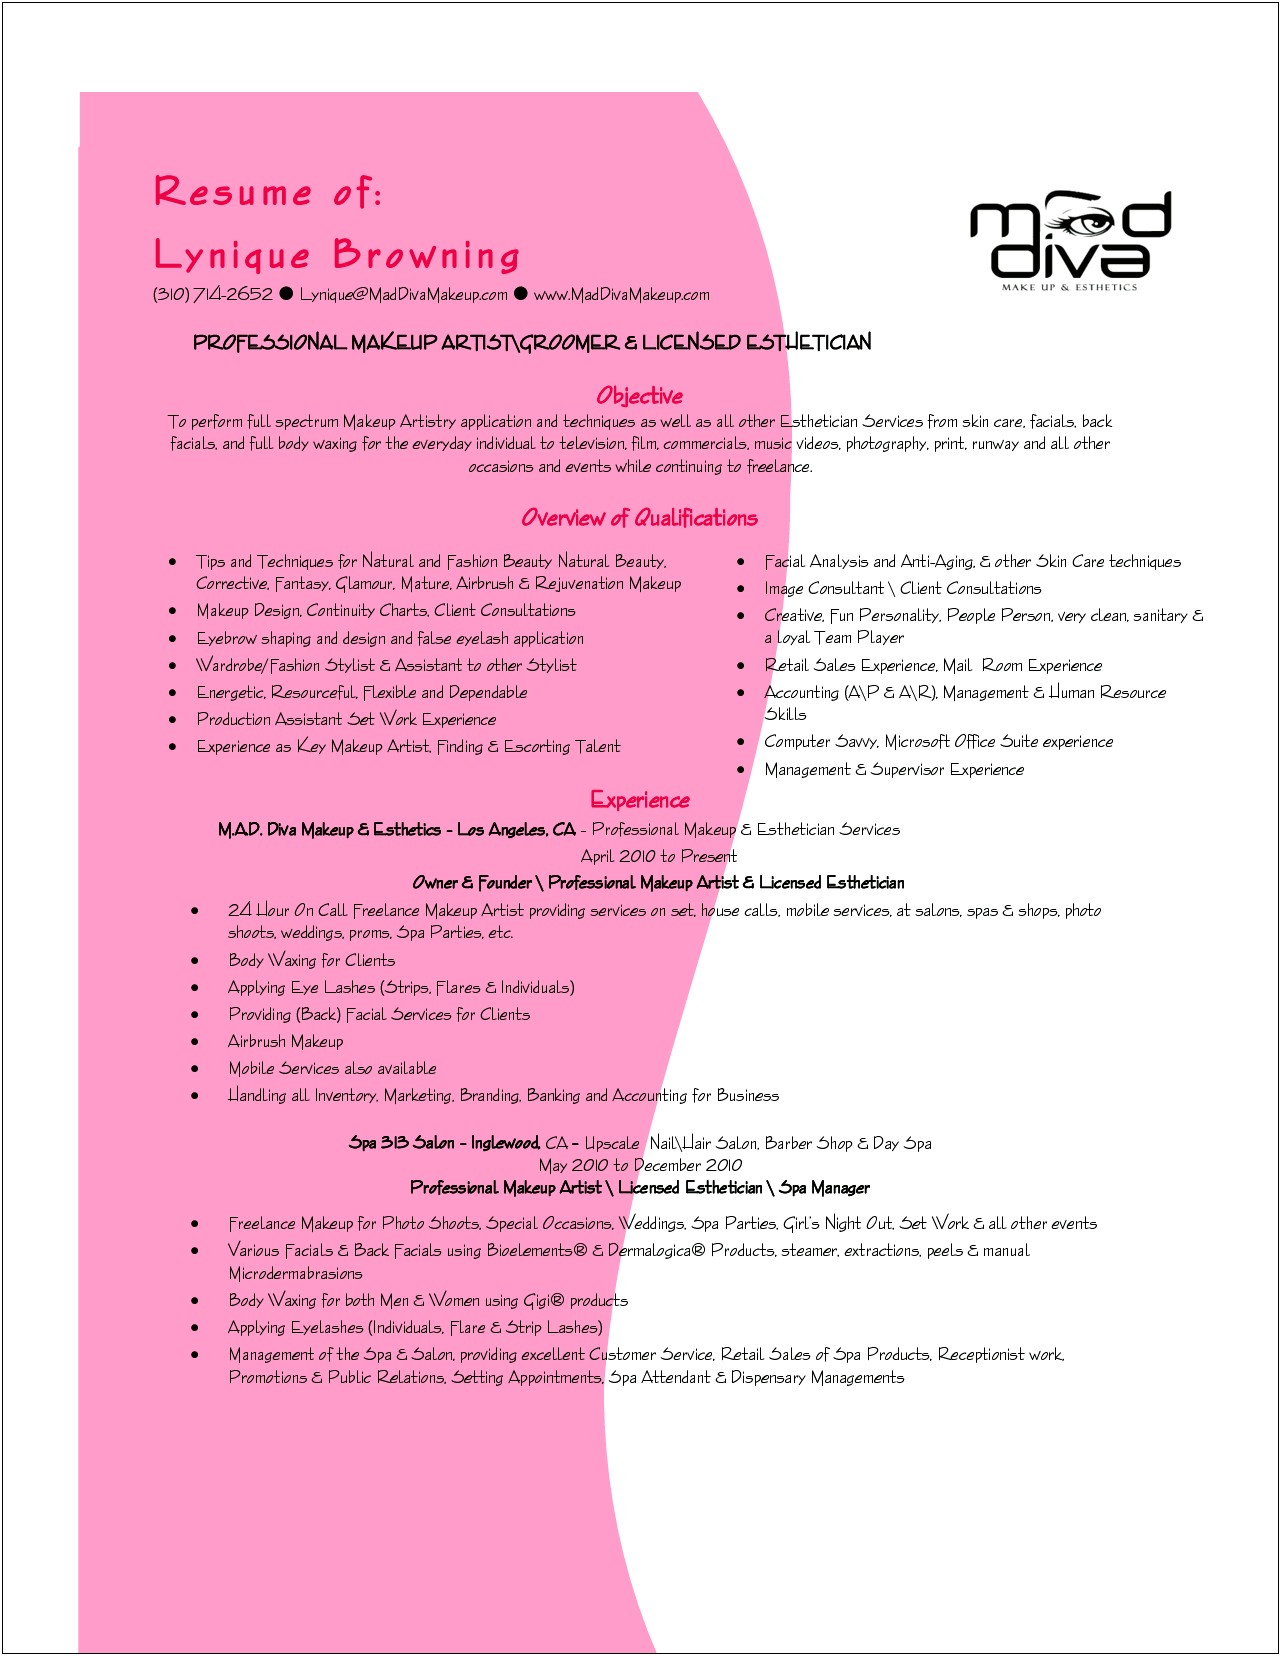 Resume Cover Letter Body Examples